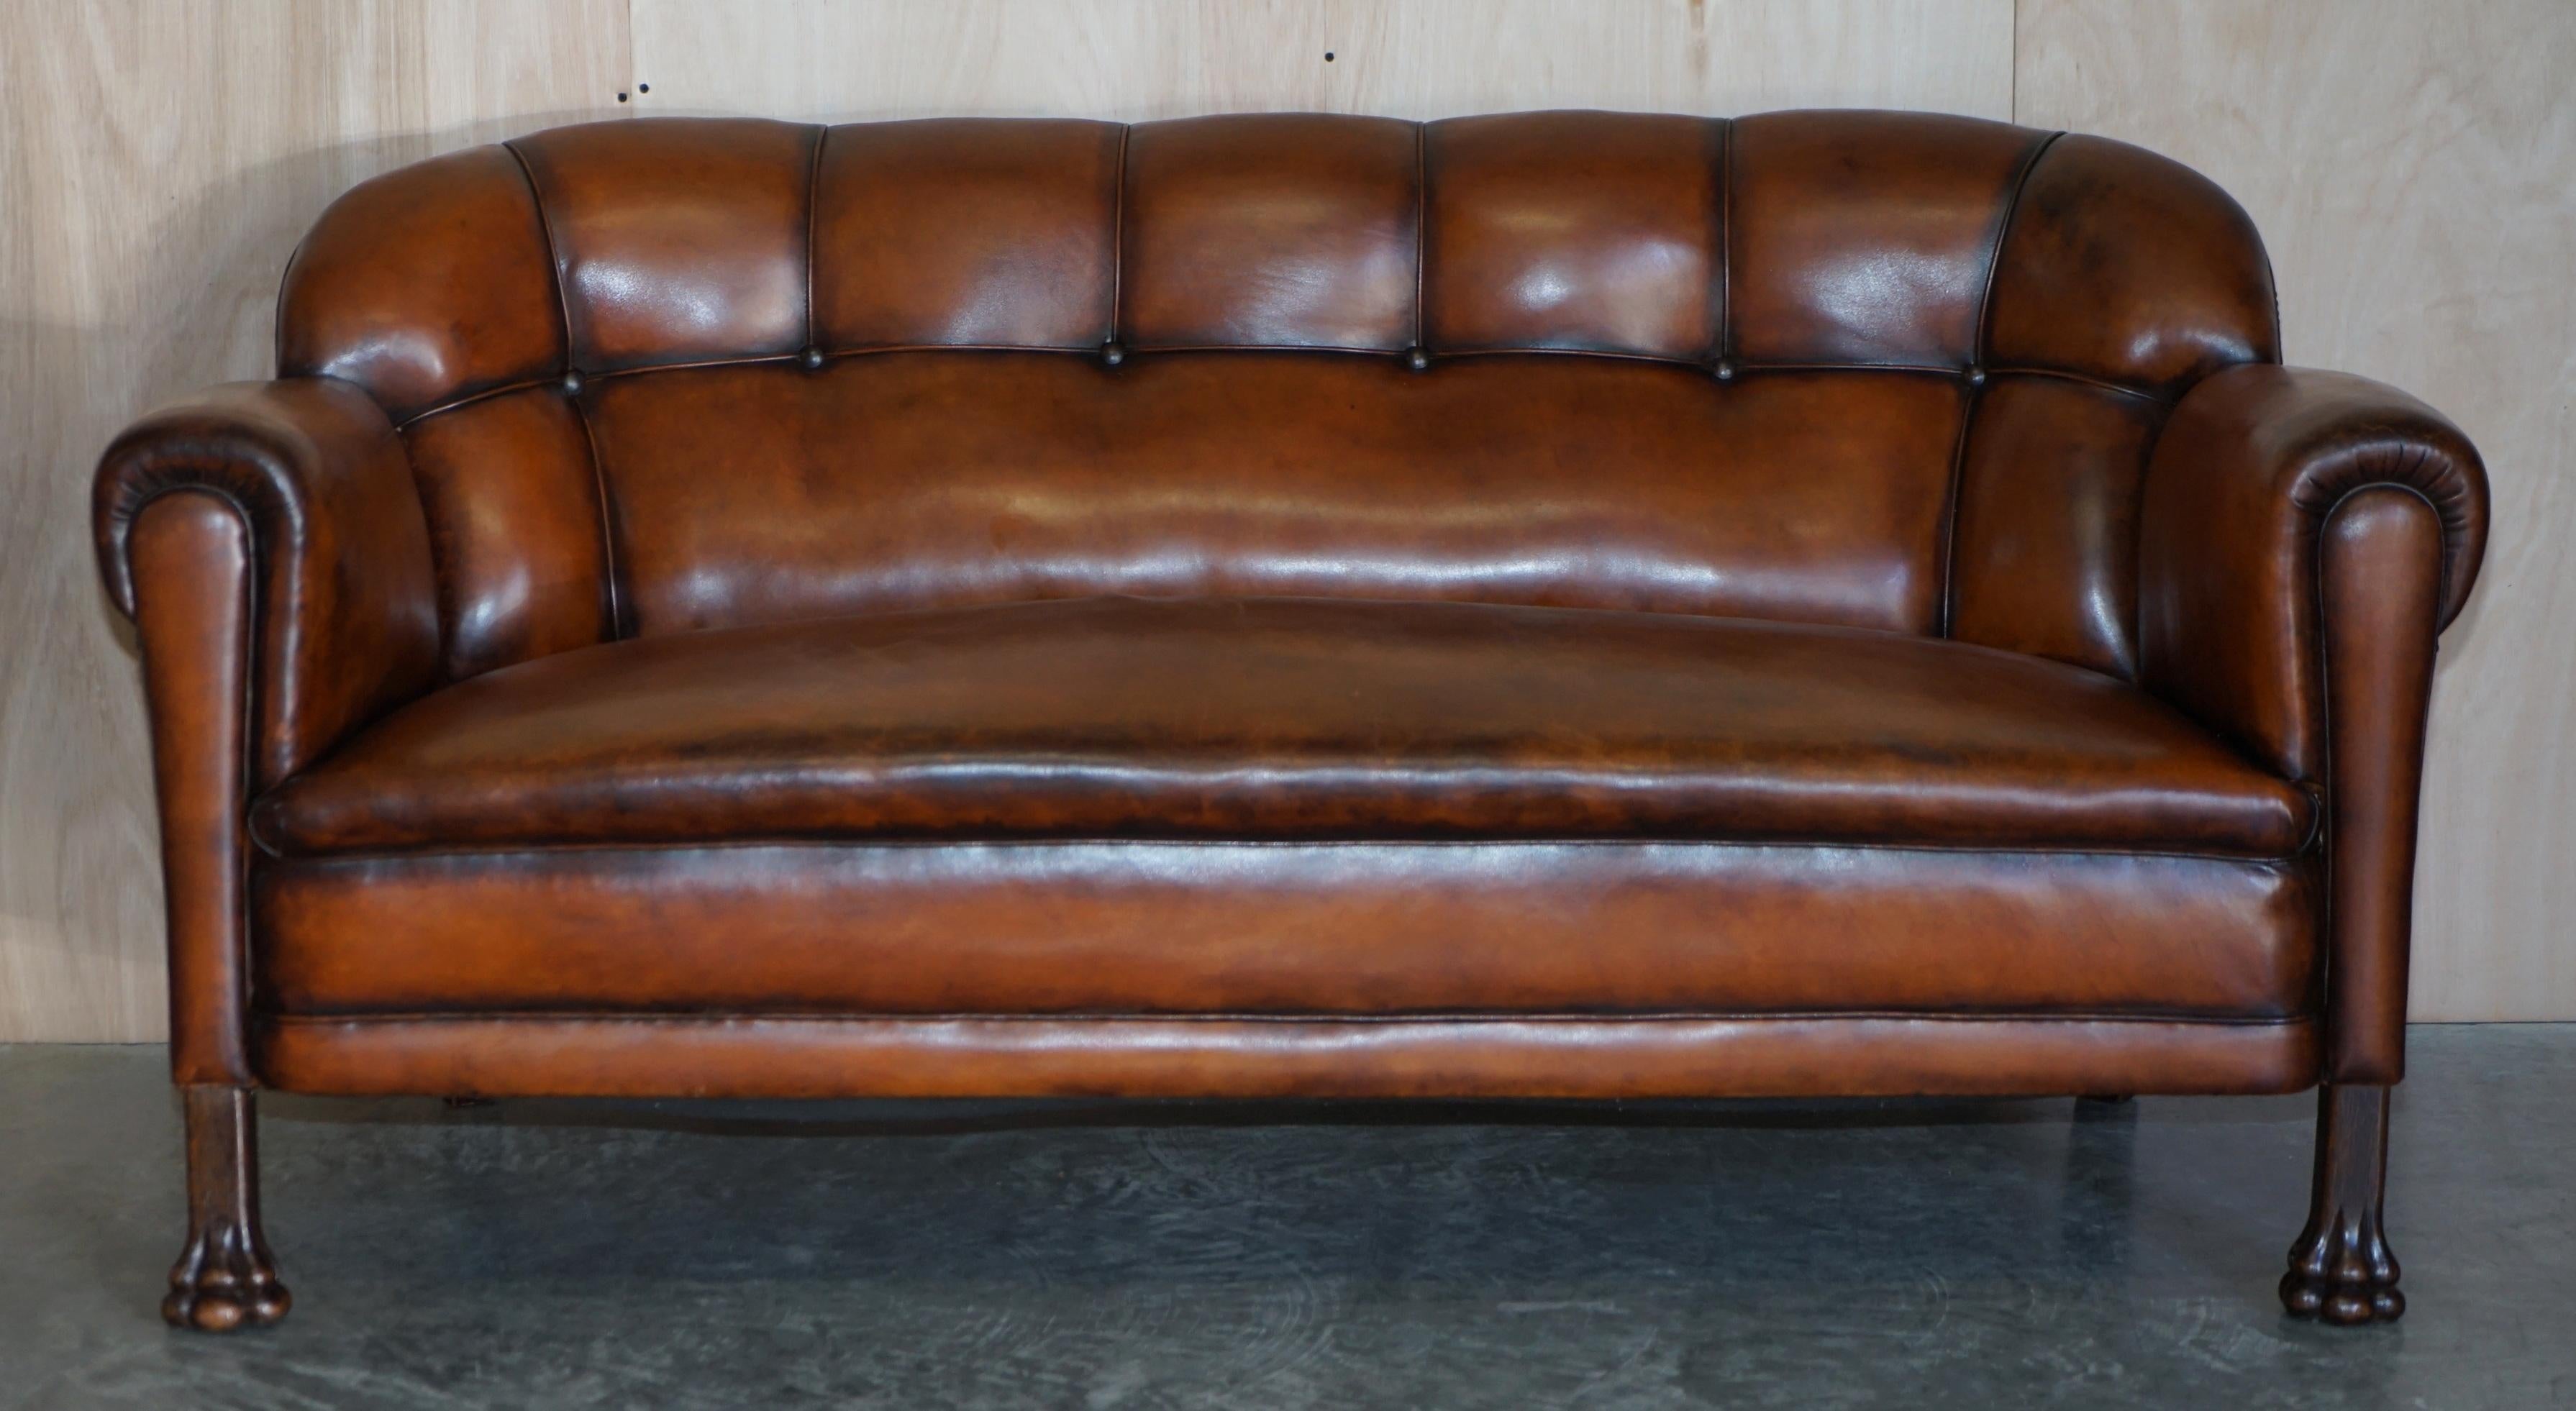 We are delighted to offer for sale this circa 1860-1880 fully restored original Swedish aged brown leather Chesterfield fully sprung sofa with hand carved oak Lion's paw feet.

This sofa base is very decorative and exceptionally comfortable for a